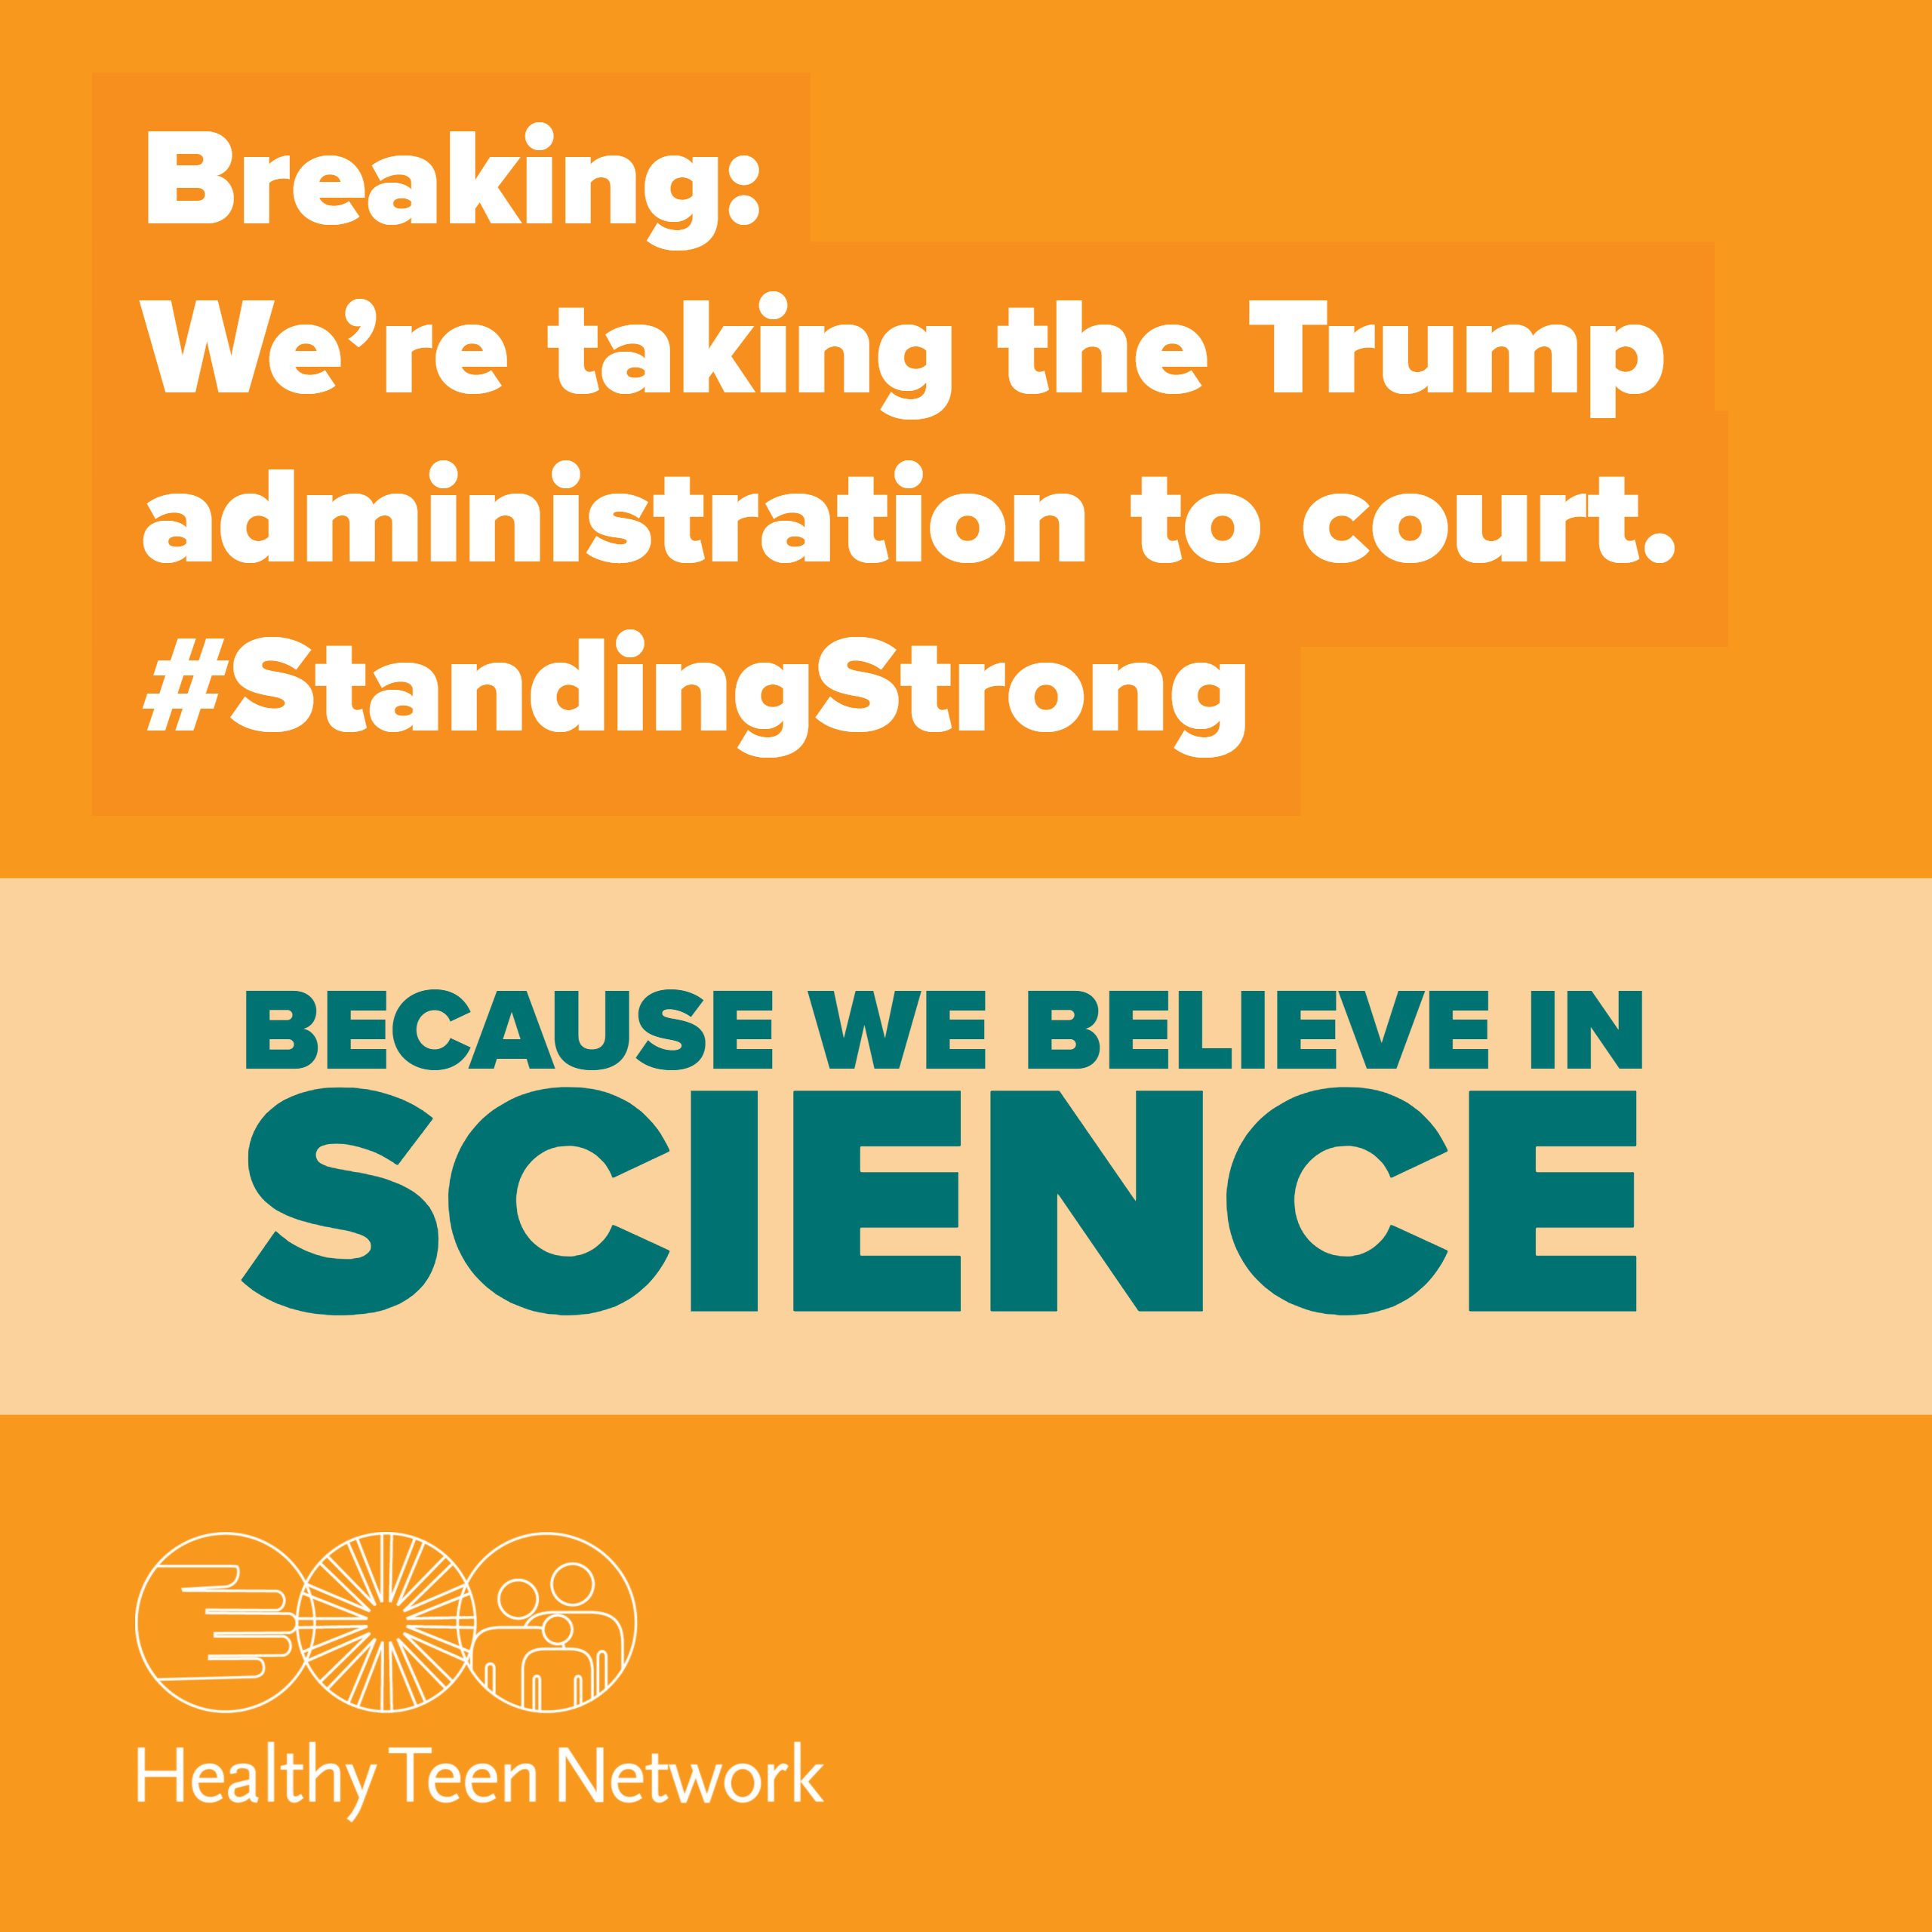 Image of word art: "Breaking: We're taking the Trump administration to court. Becaues we believe in Science. #standingstrong"and Healthy Teen Network logo